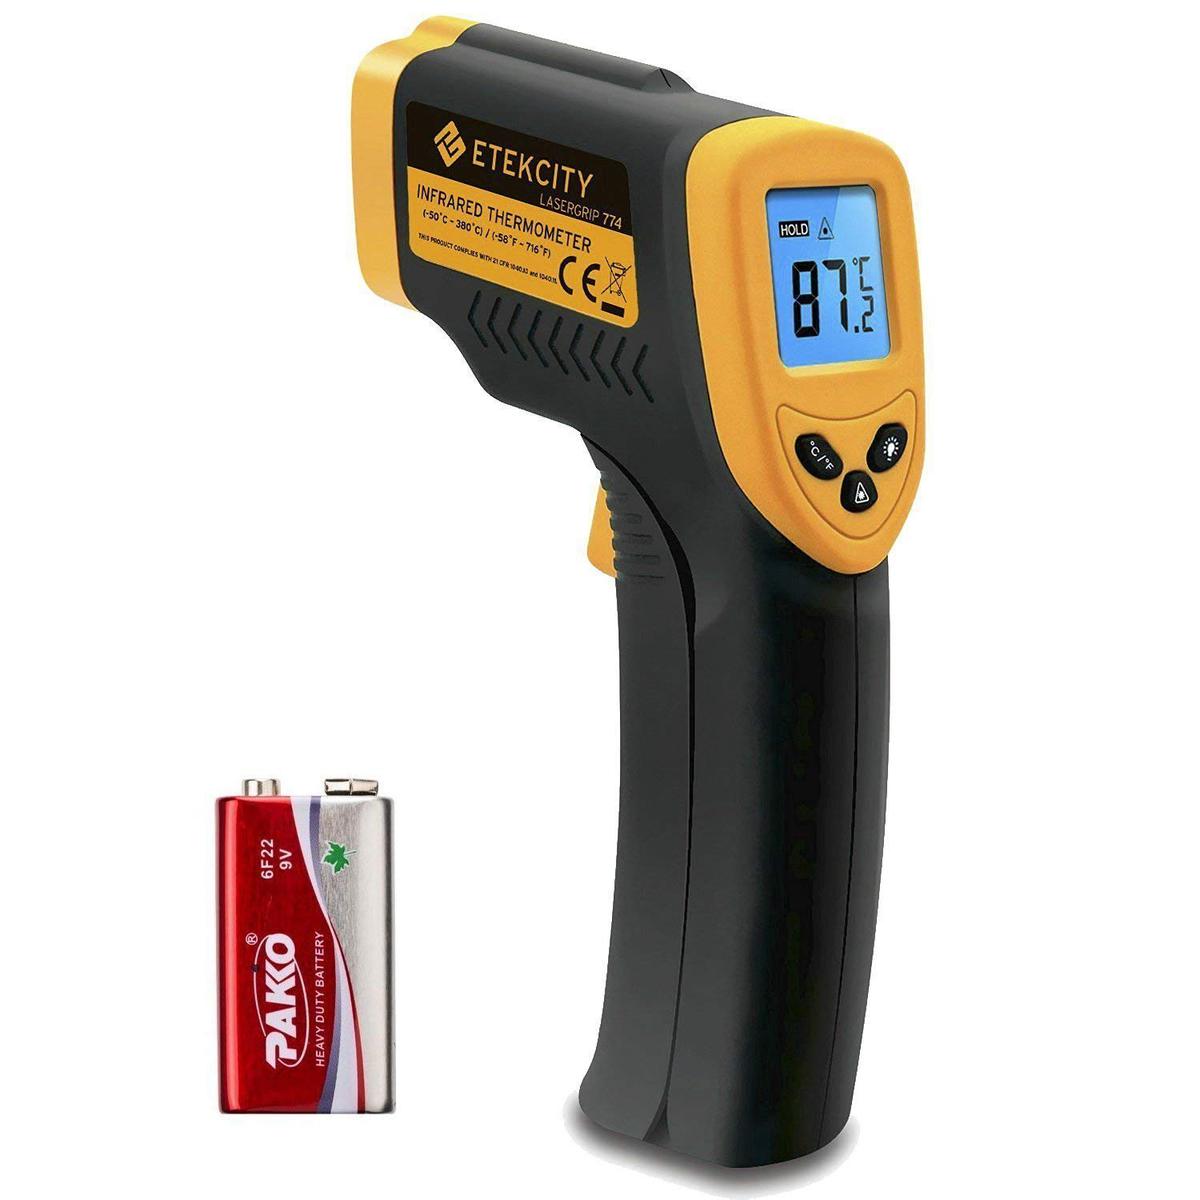 Digital laser infrared thermometer from Amazon.